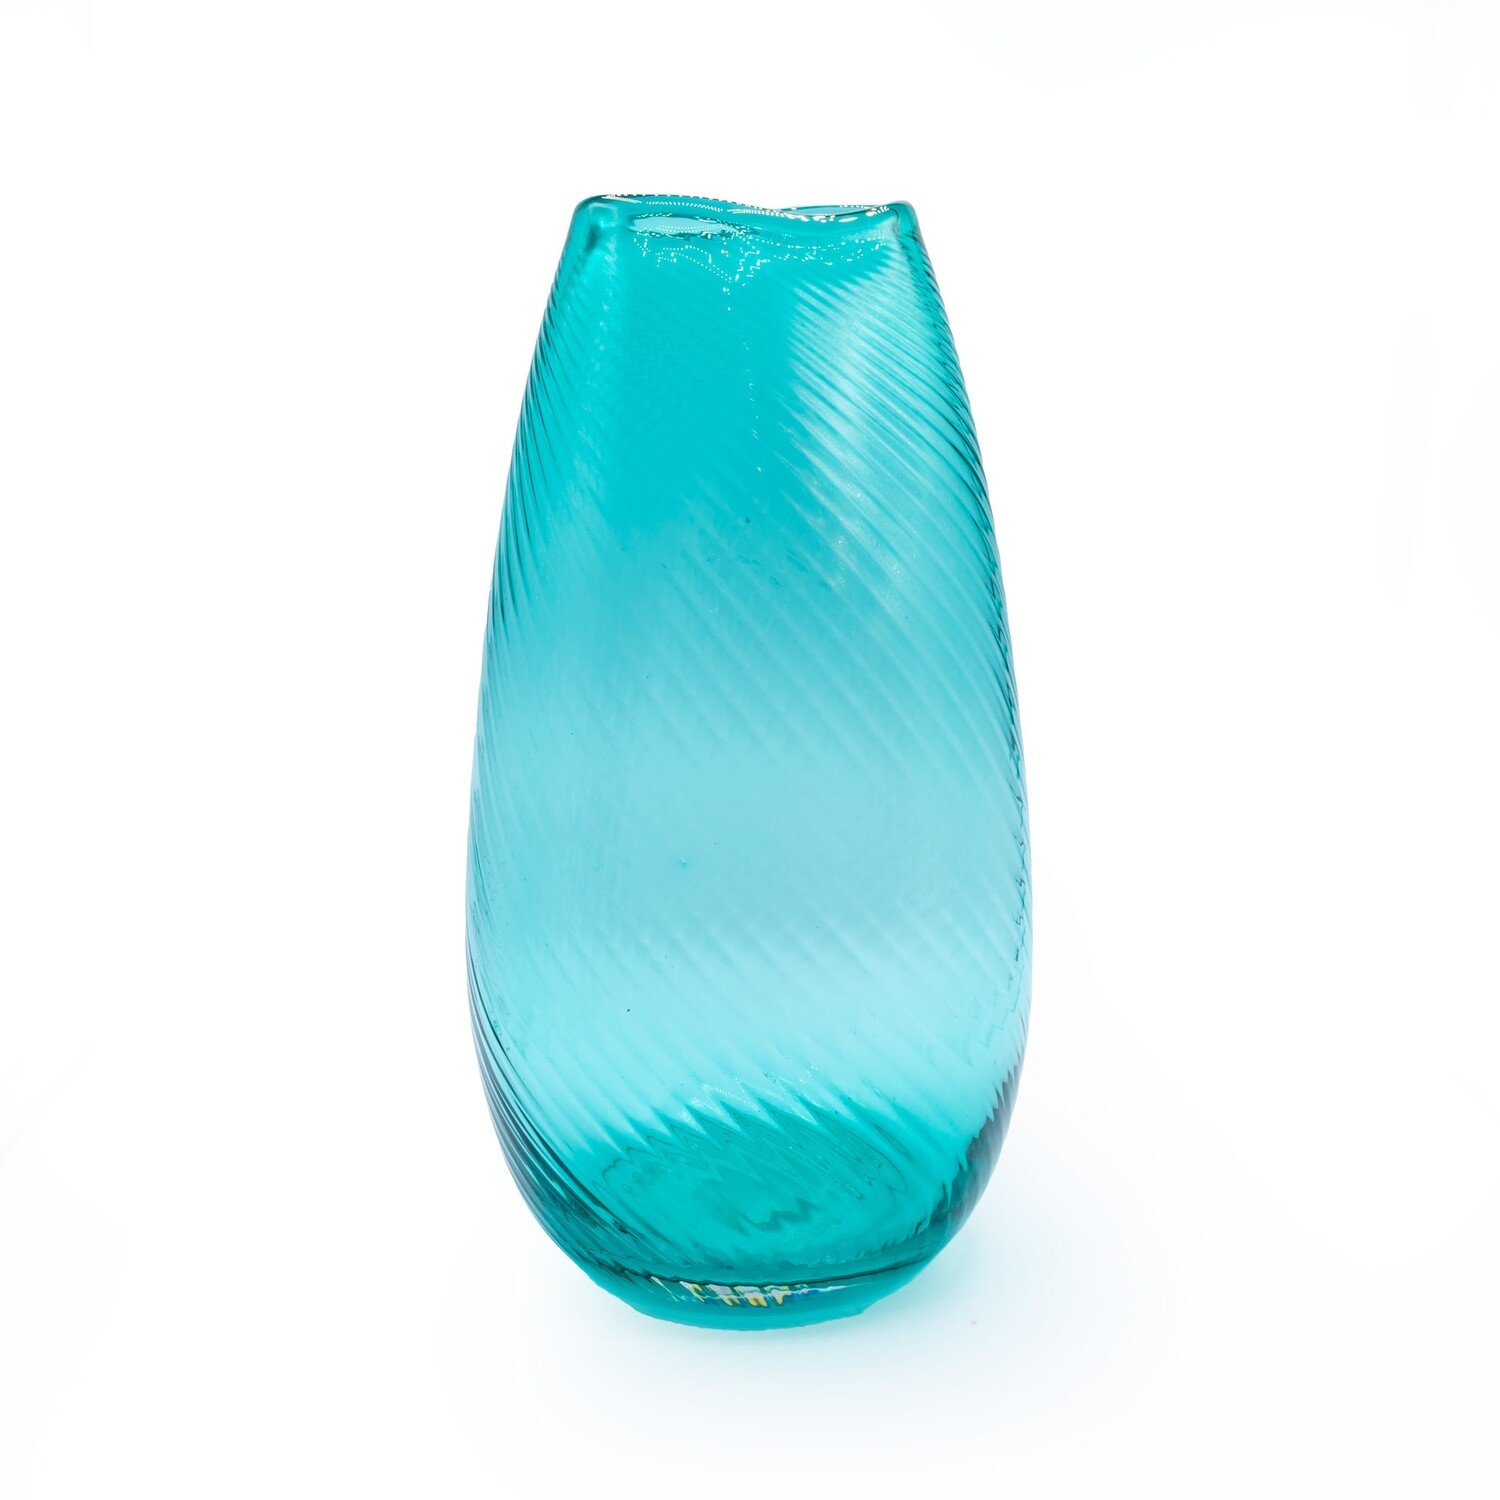 Glass Vase - Teal with Lines